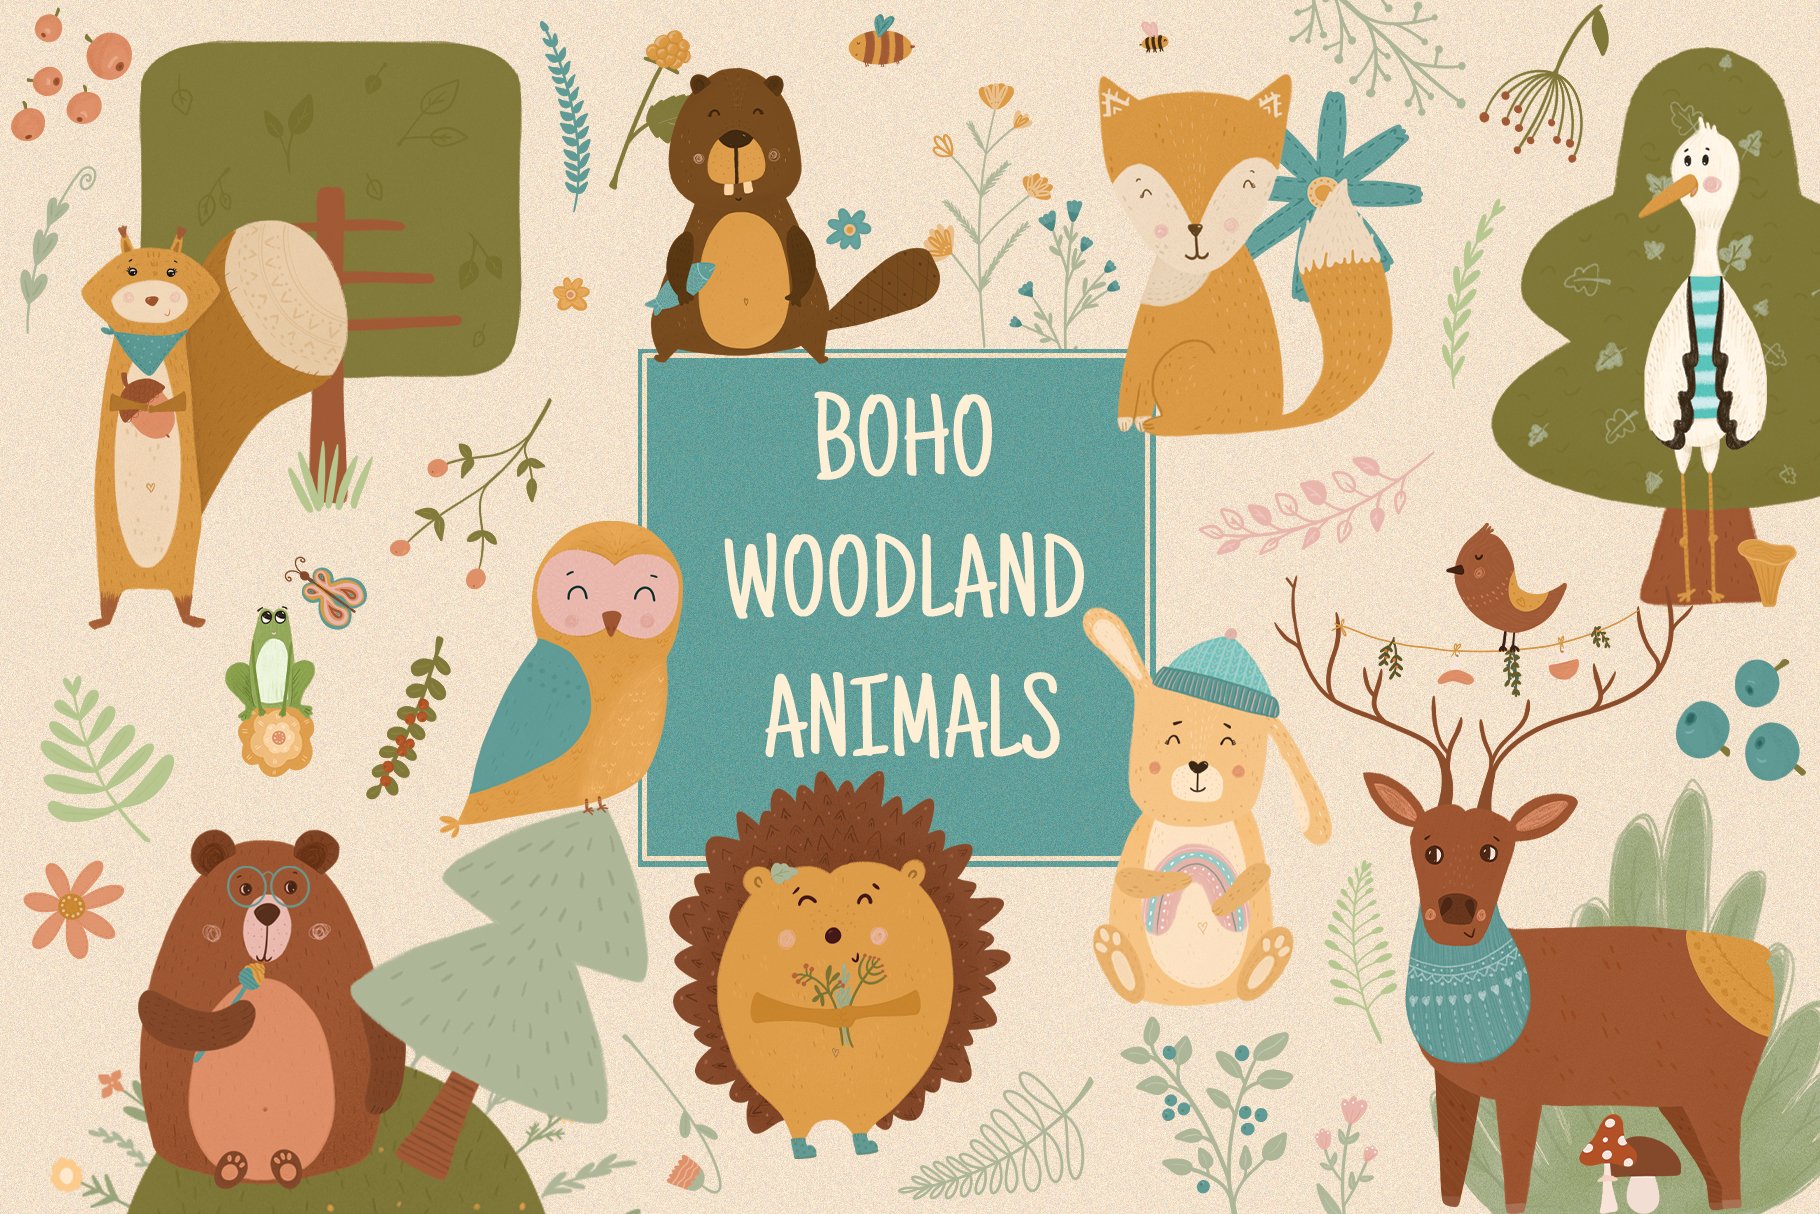 Cute Woodland Animals and Plants cover image.